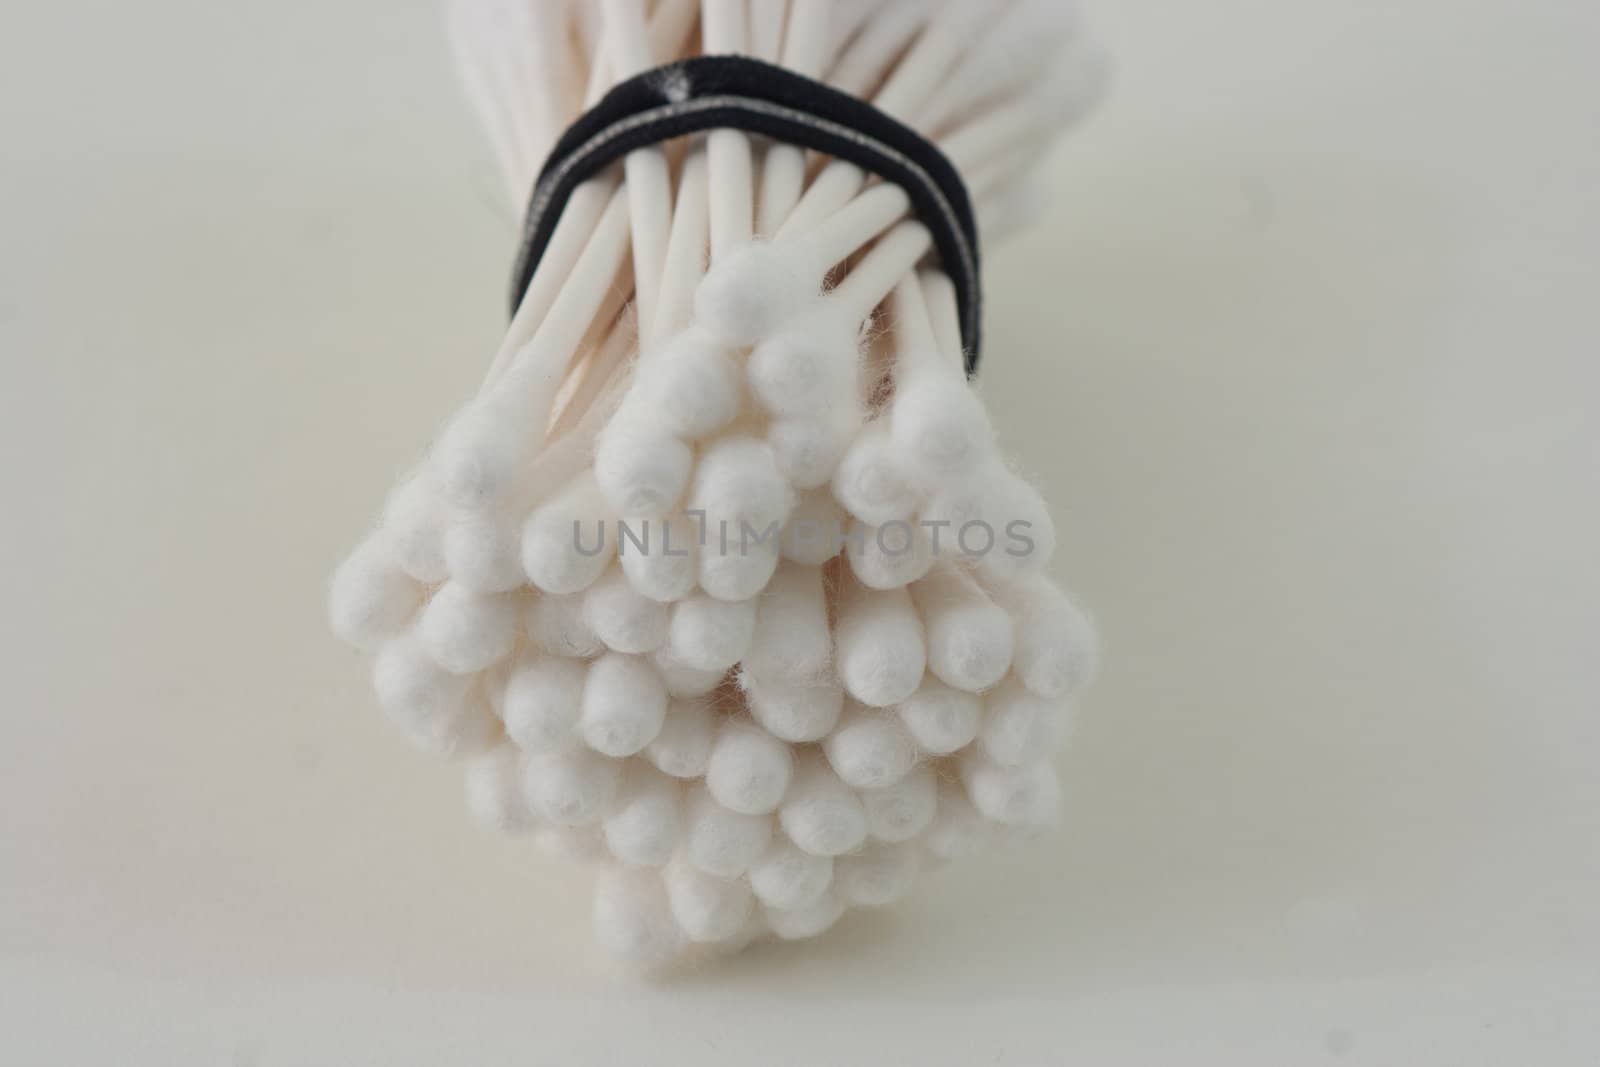 Bundle of cotton swabs by rothphotosc